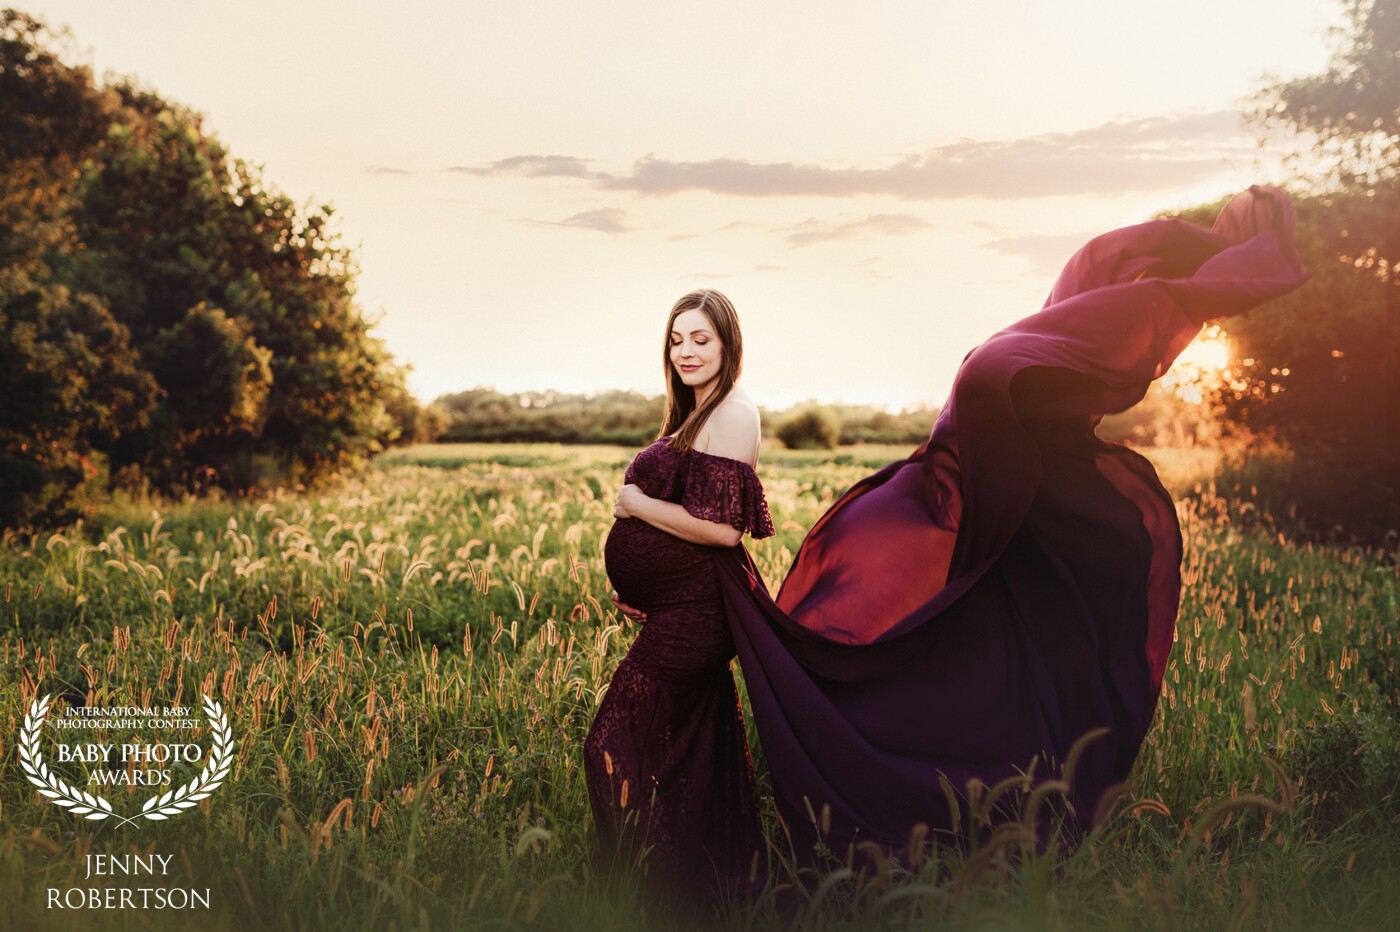 Sunset maternity sessions in a Kansas field are so beautiful. This Momma nailed the pose while Dad had the perfect fabric toss! Our first session was cut short by storms but we made up for it with this amazing maternity session!